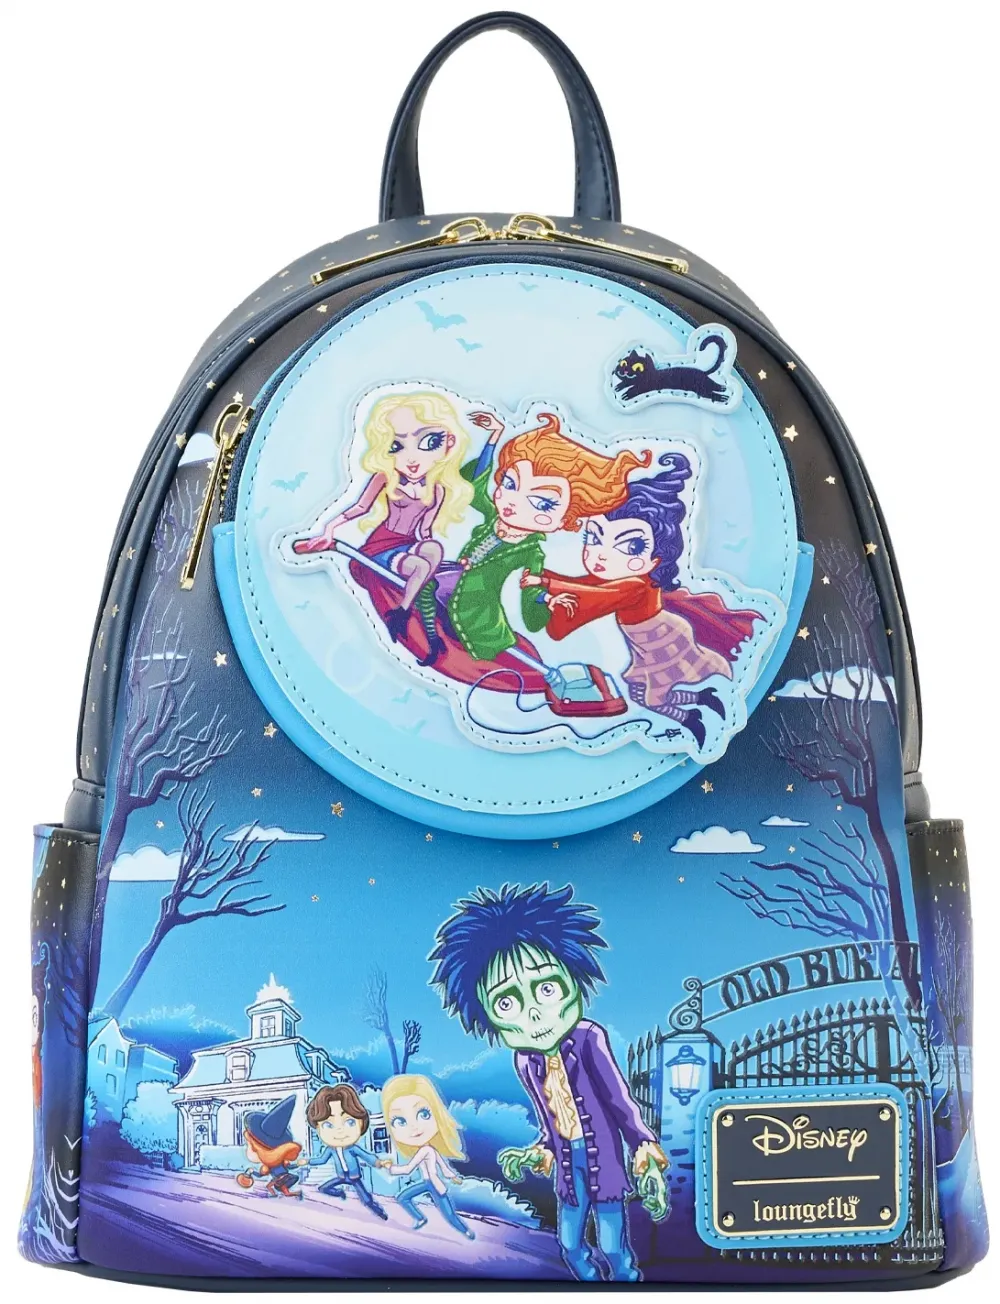 Hocus Pocus Movie Poster Glow Mini Backpack Loungefly